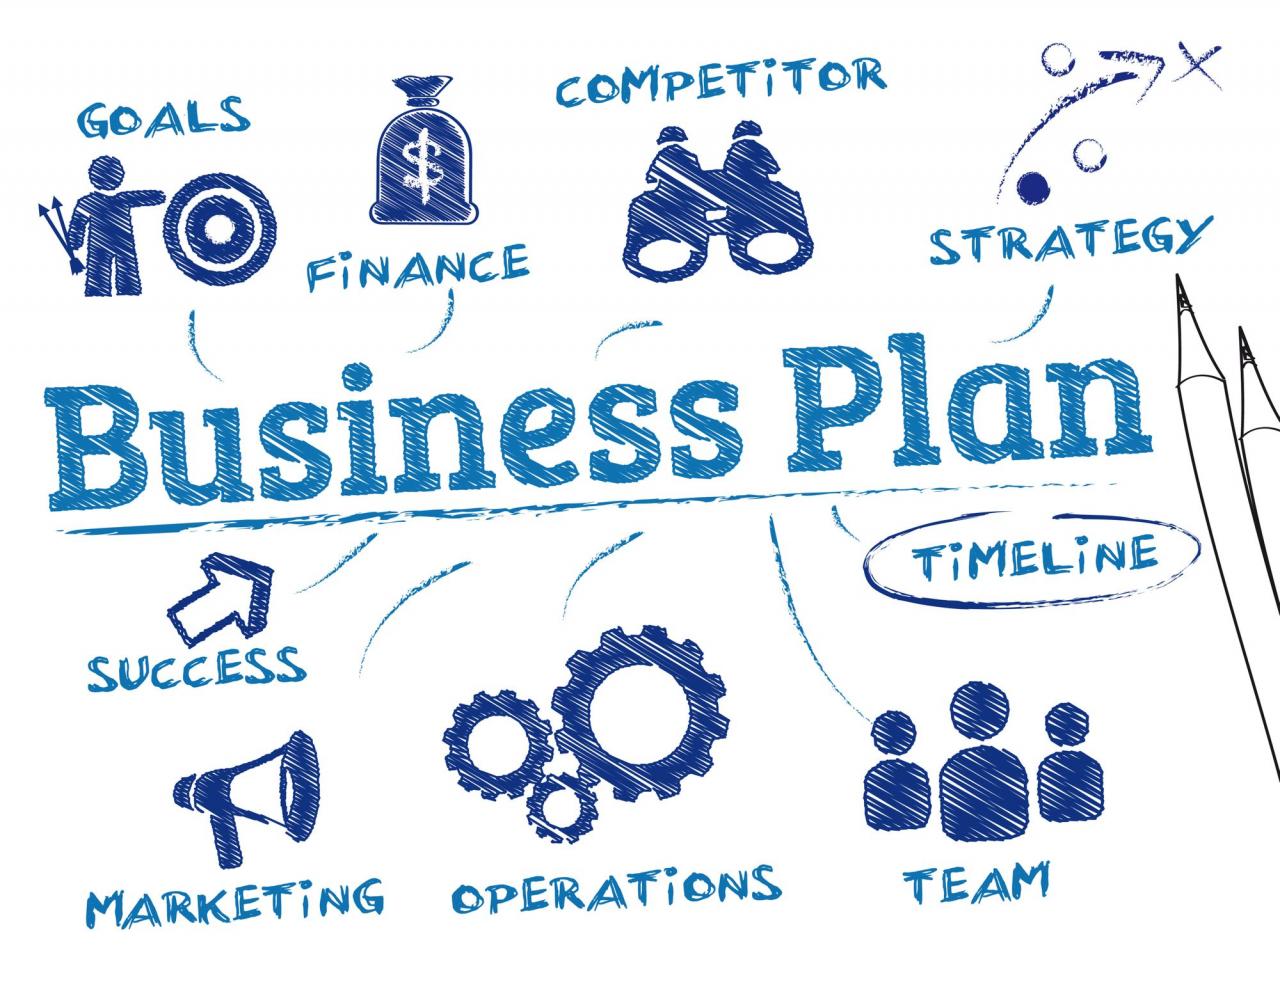 3.3 how to create an effective business plan quizlet